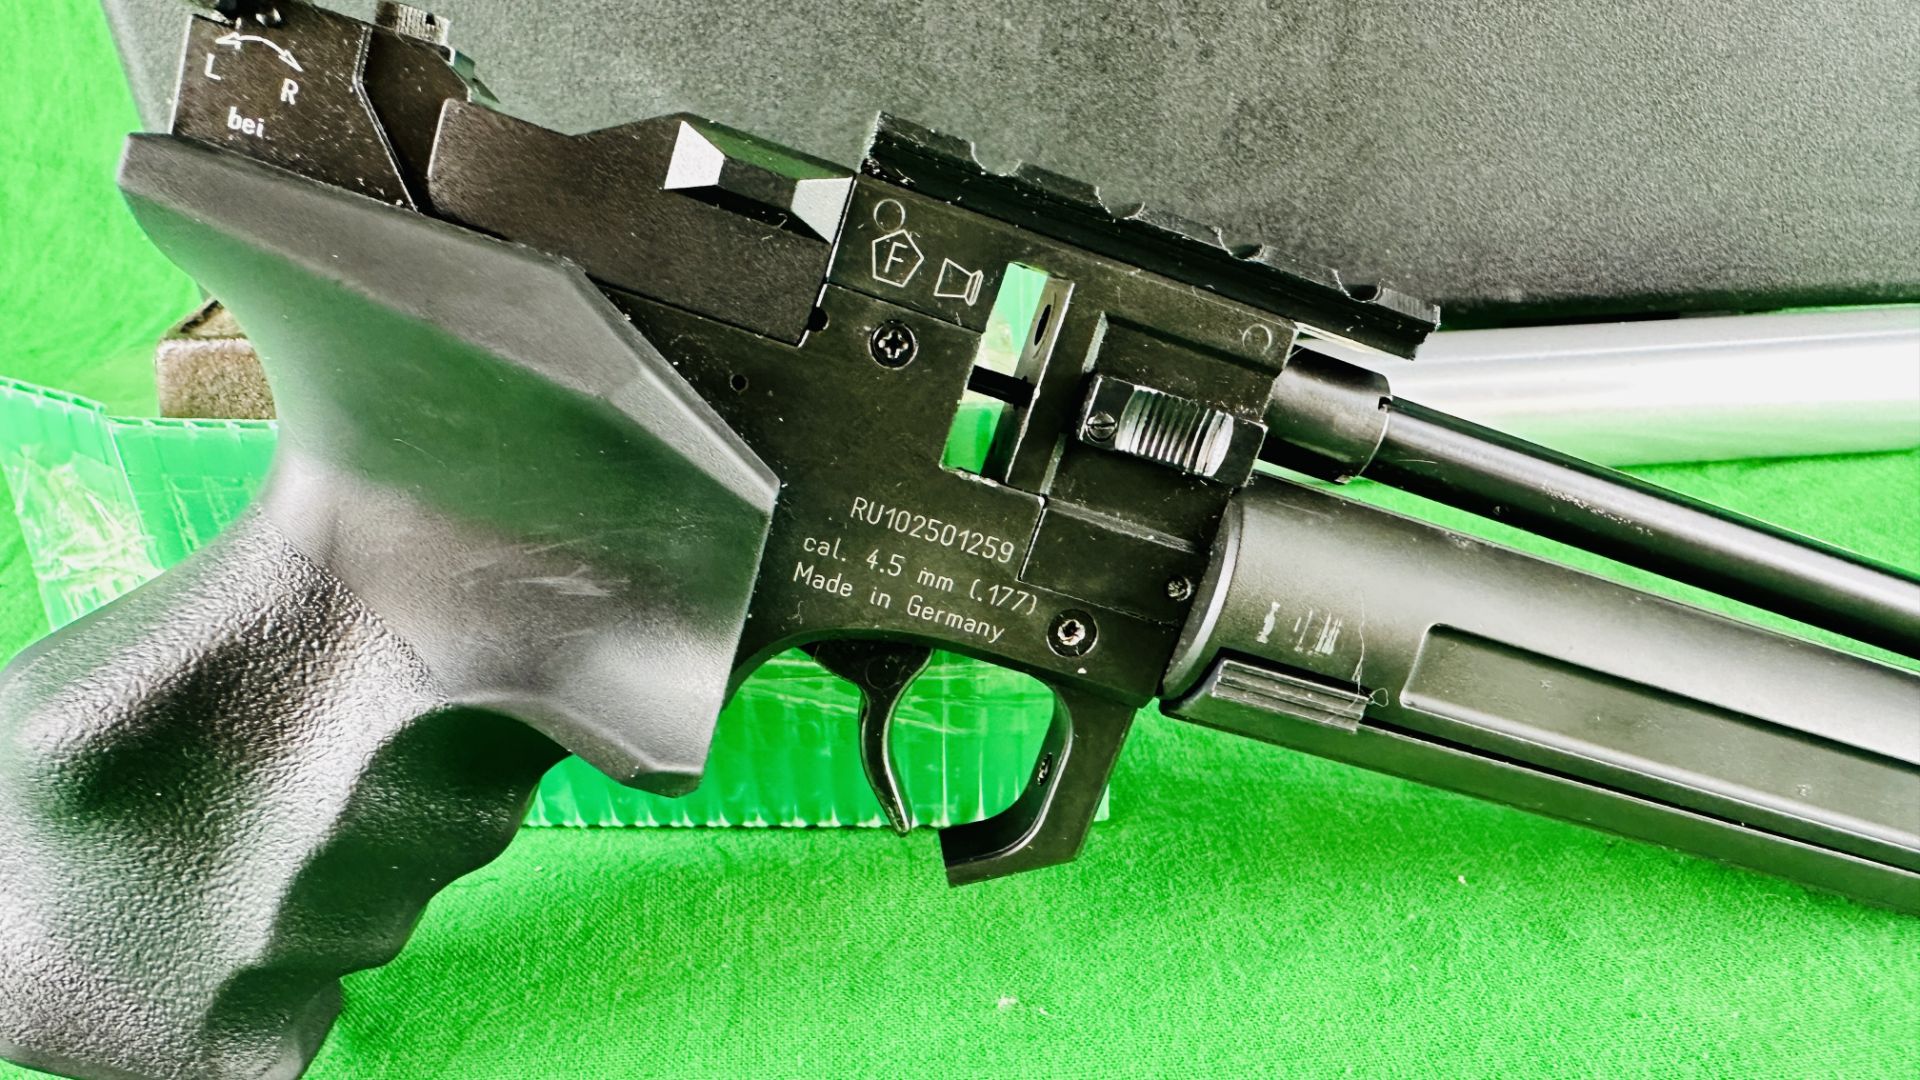 ROHM TWIN MASTER ACTION Co2 AIR PISTOL COMPLETE WITH ONE 8 SHOT MAGAZINE AND A ROHM SILENCER IN - Image 2 of 11